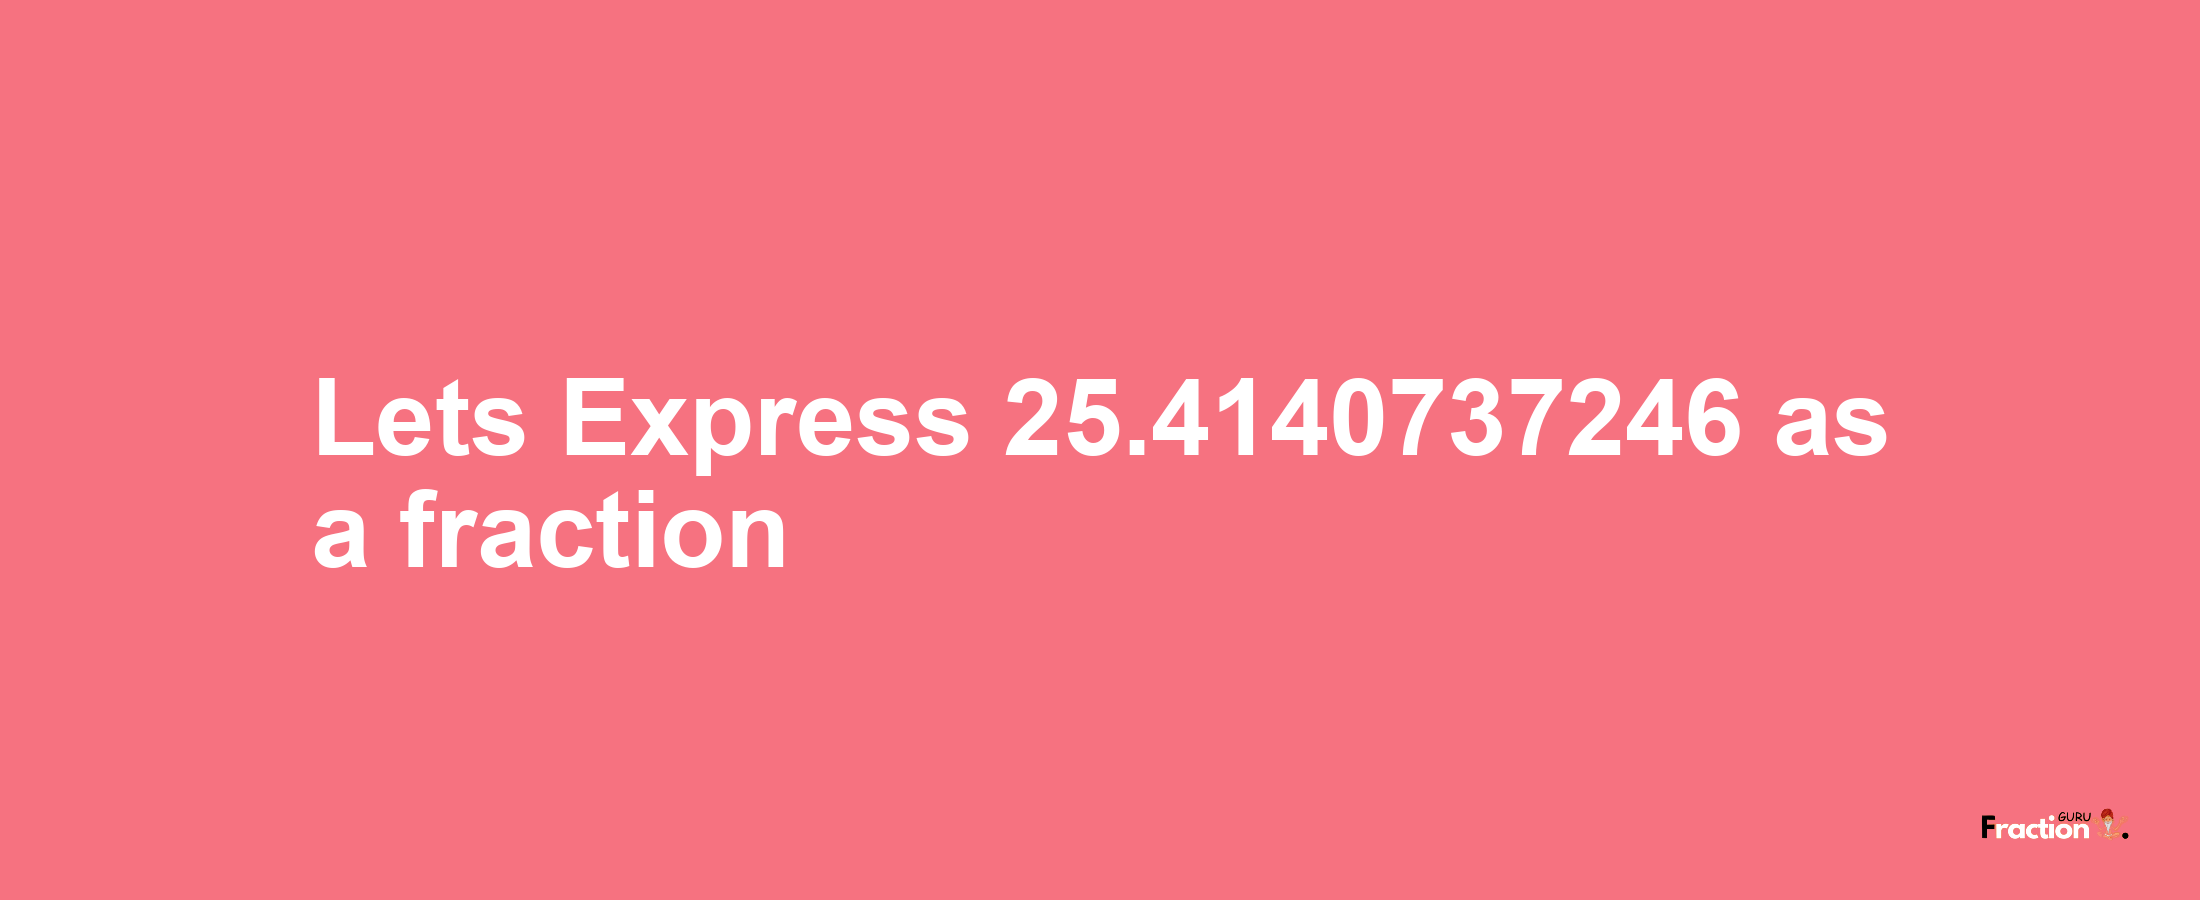 Lets Express 25.4140737246 as afraction